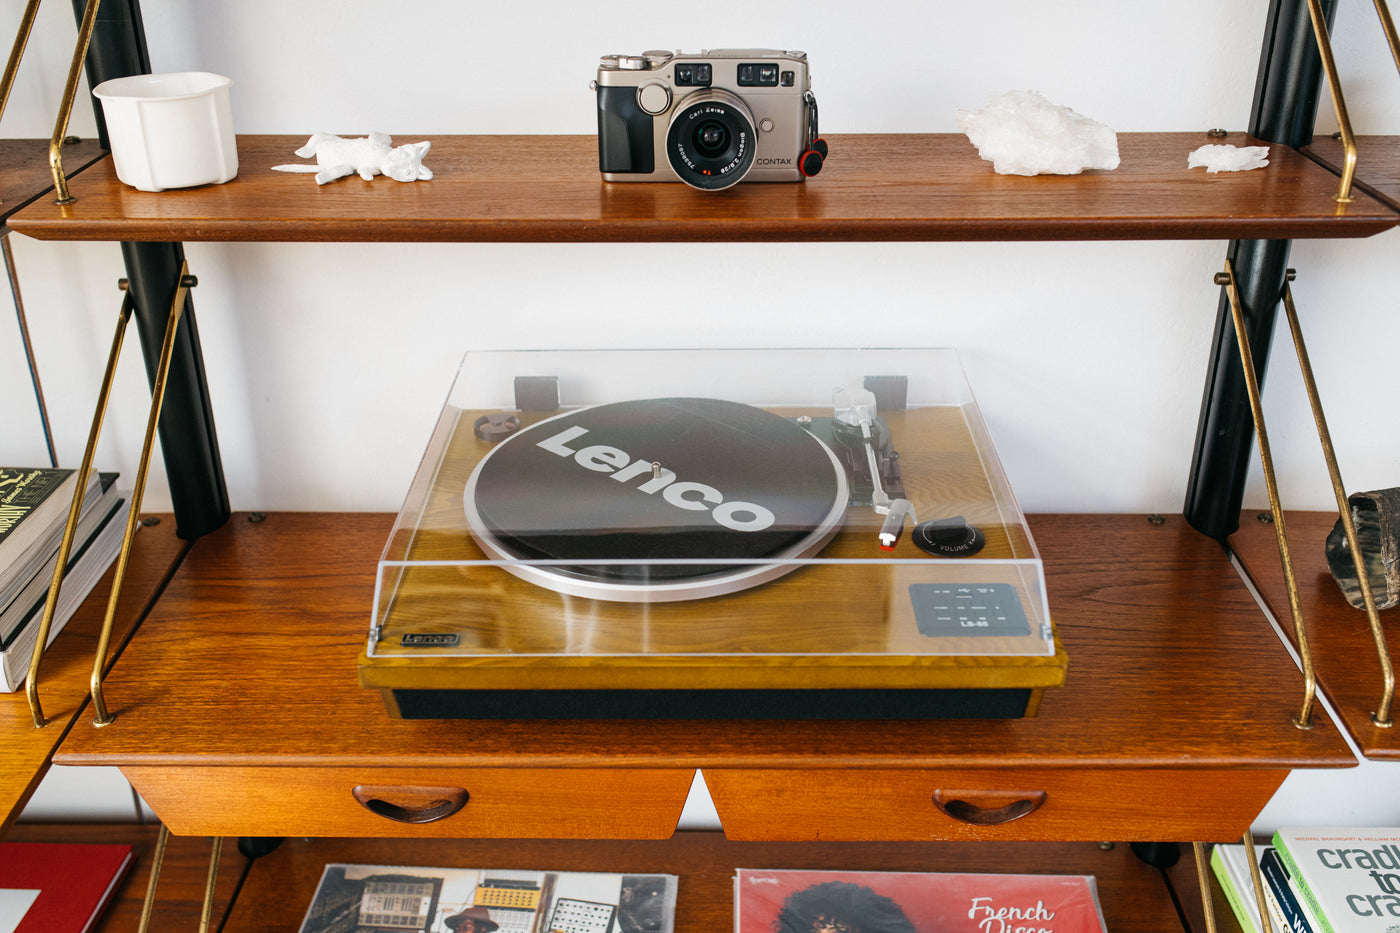 LENCO LS-55WA - Record Player with Bluetooth®, USB MP3 encoder, speakers - Wood